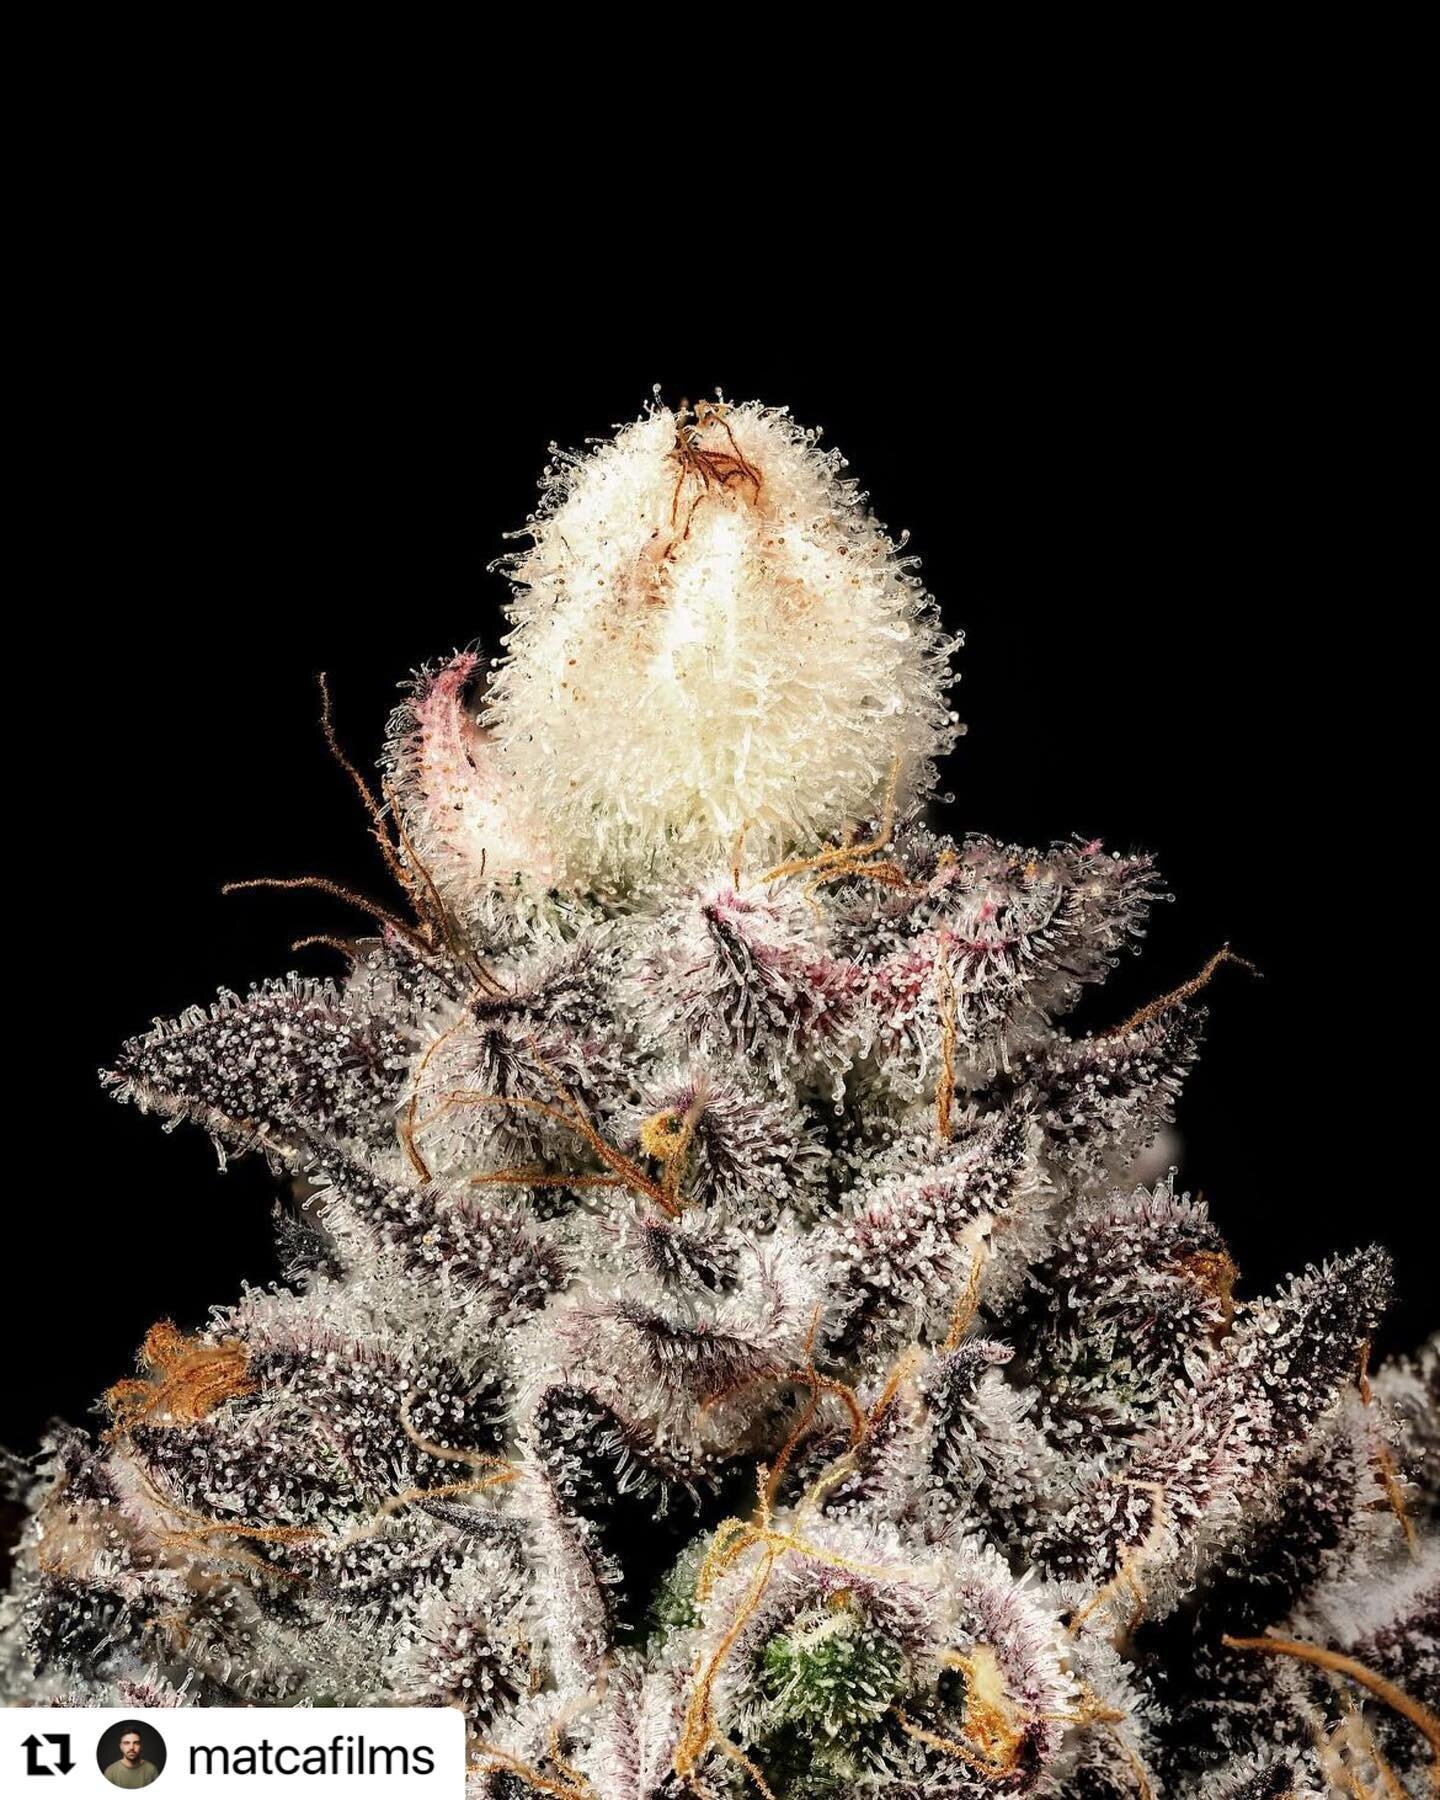 Something special for the weekend my friends - swipe for full effect 💚🔥💚
・・・
ZAZA 🤍

Grow x @maulamonica 
🧬 @flowersandterps._ x @mountainseeds 
📸 @matcafilms 

It&rsquo;s always fun to photograph exotic and great genetics 🤍